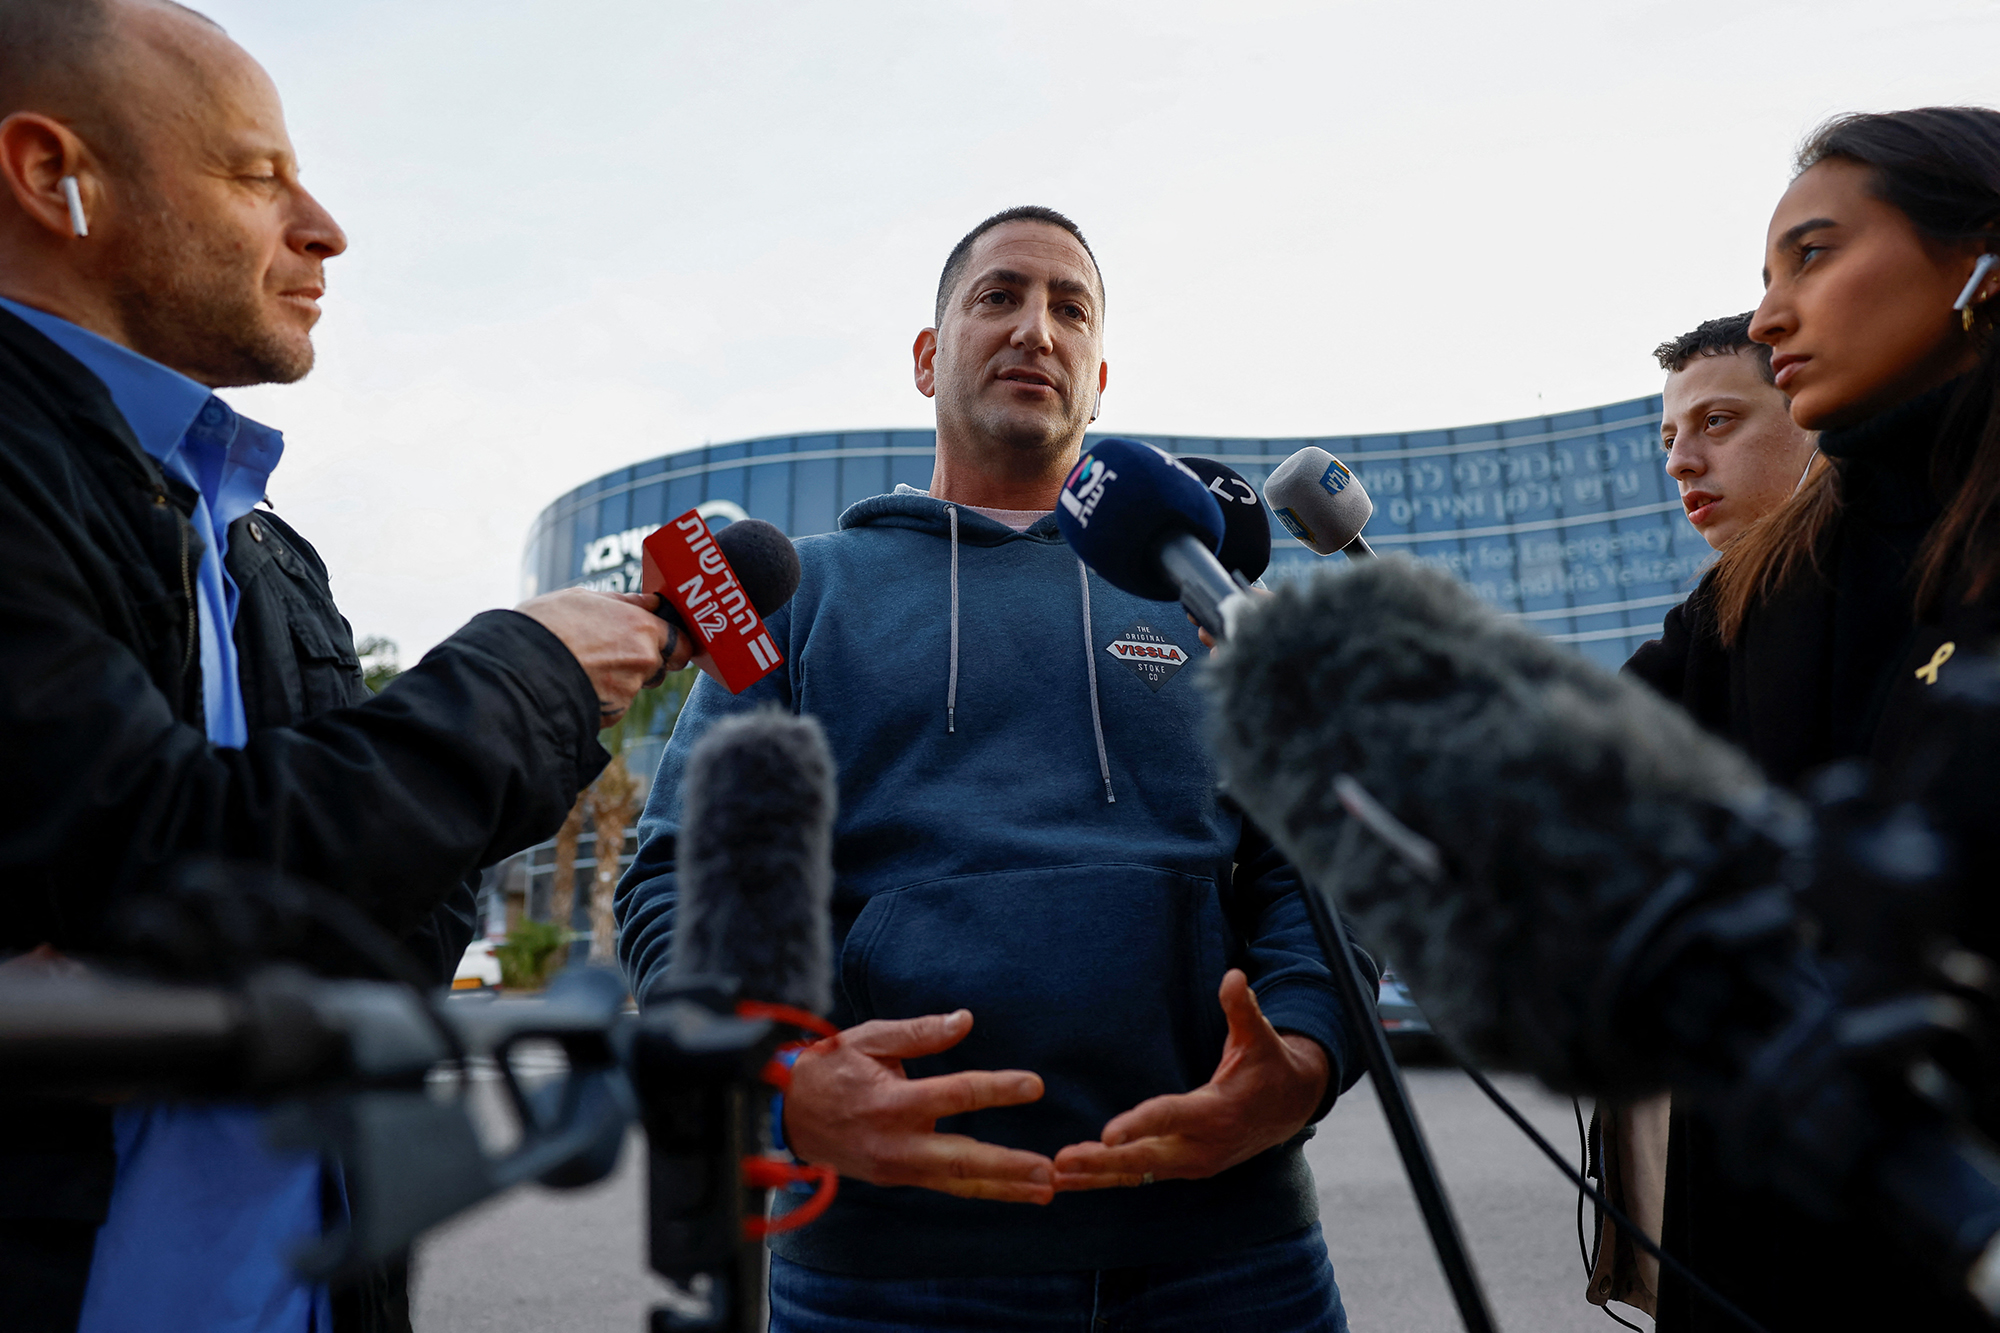 Idan Begerano, son-in-law of rescued hostage Louis Har speaks to members of the media at the Sheba Medical Center in Ramat Gan, east of Tel Aviv, Israel, on February 12.